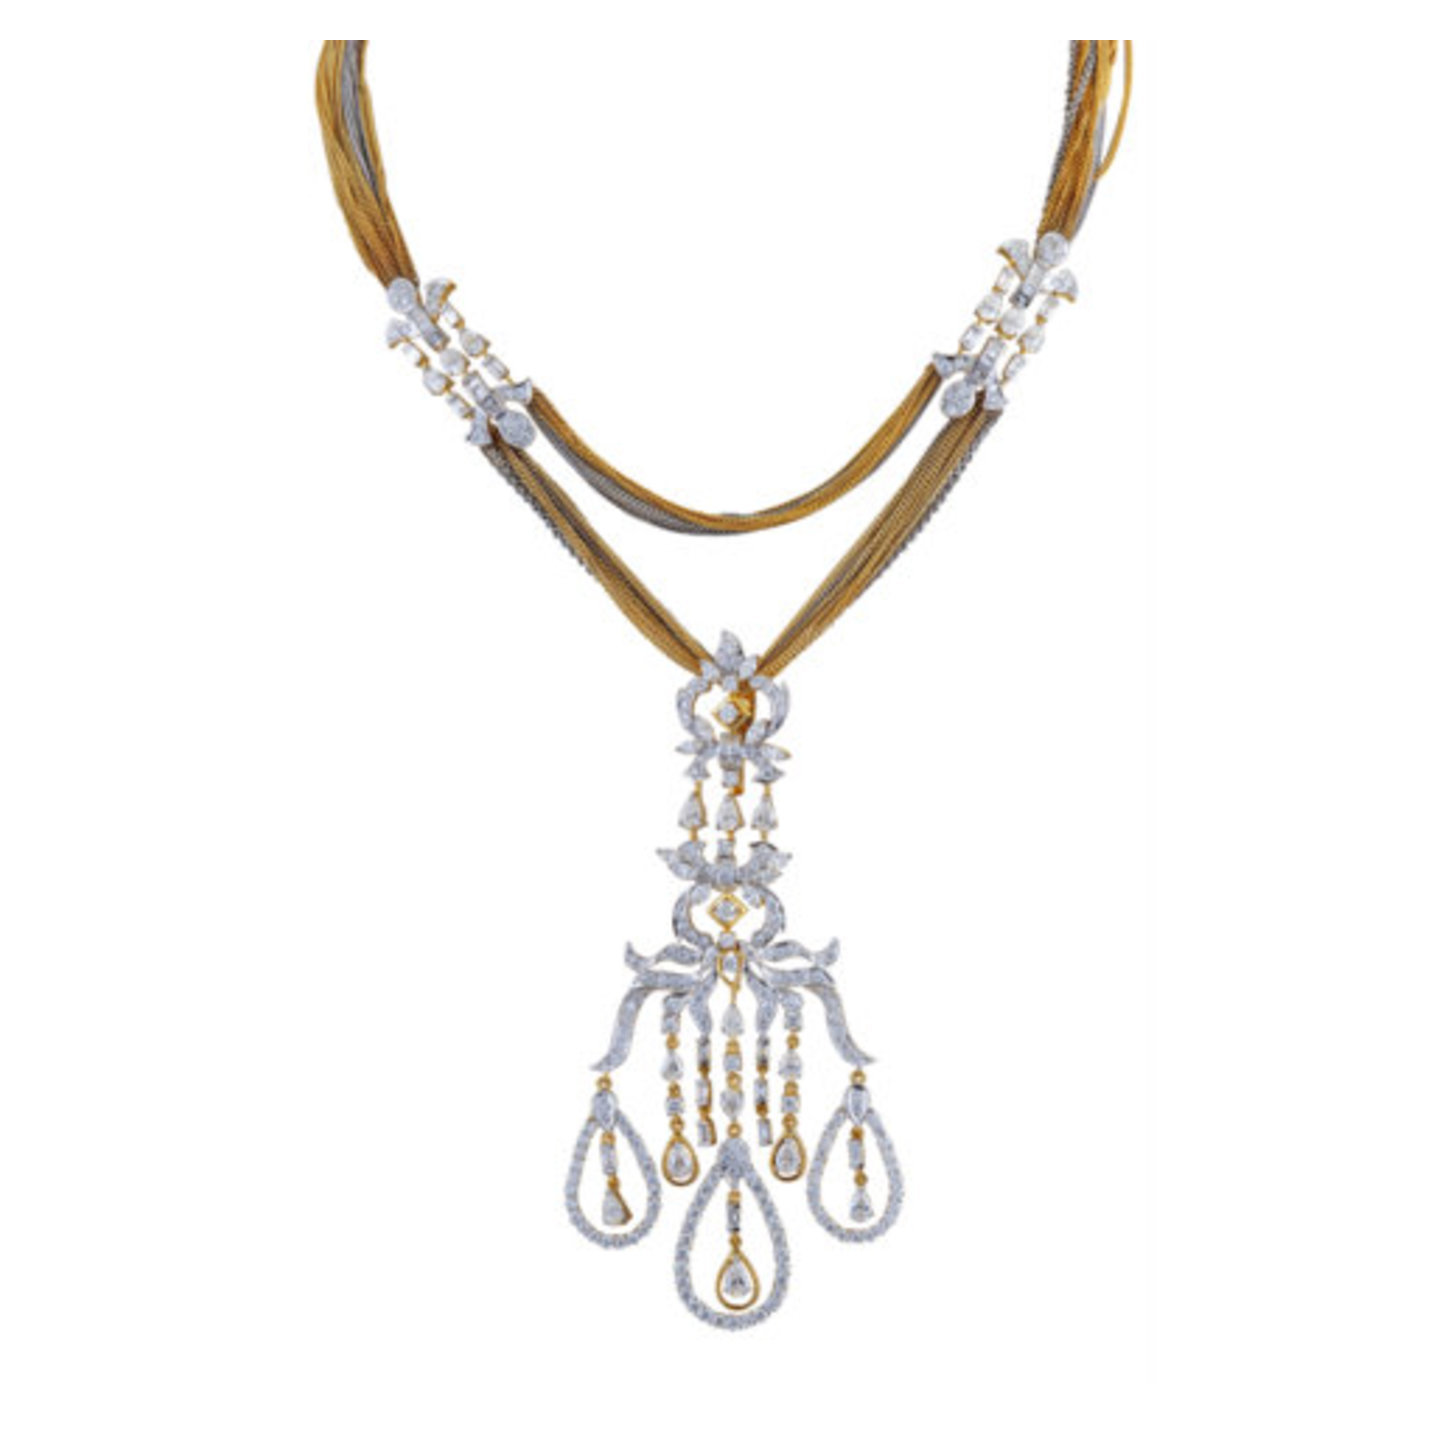 An Elegant yet elaborate diamond pendant necklace in muti hued cluster chains